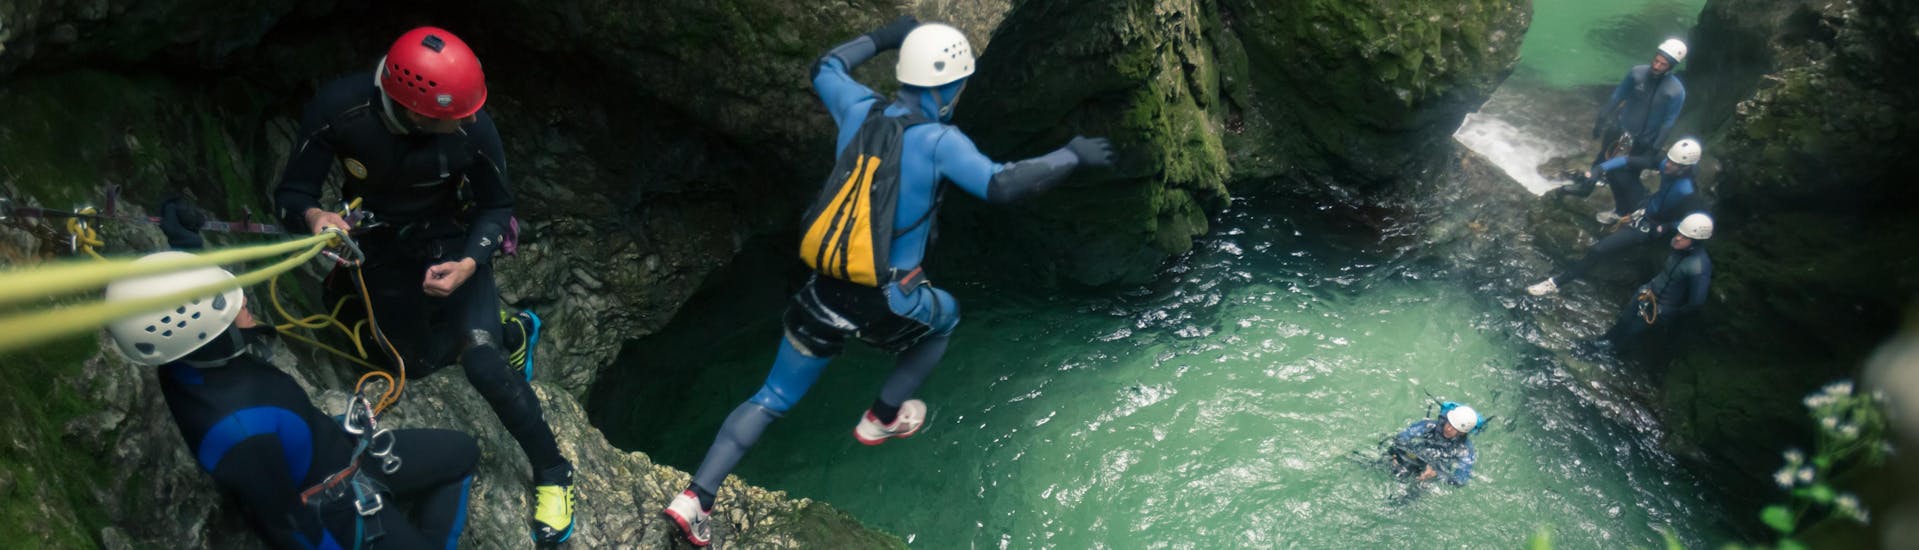 Canyoning Adventure in Triglav National Park for Groups with 3glav Adventures Bled - Hero image